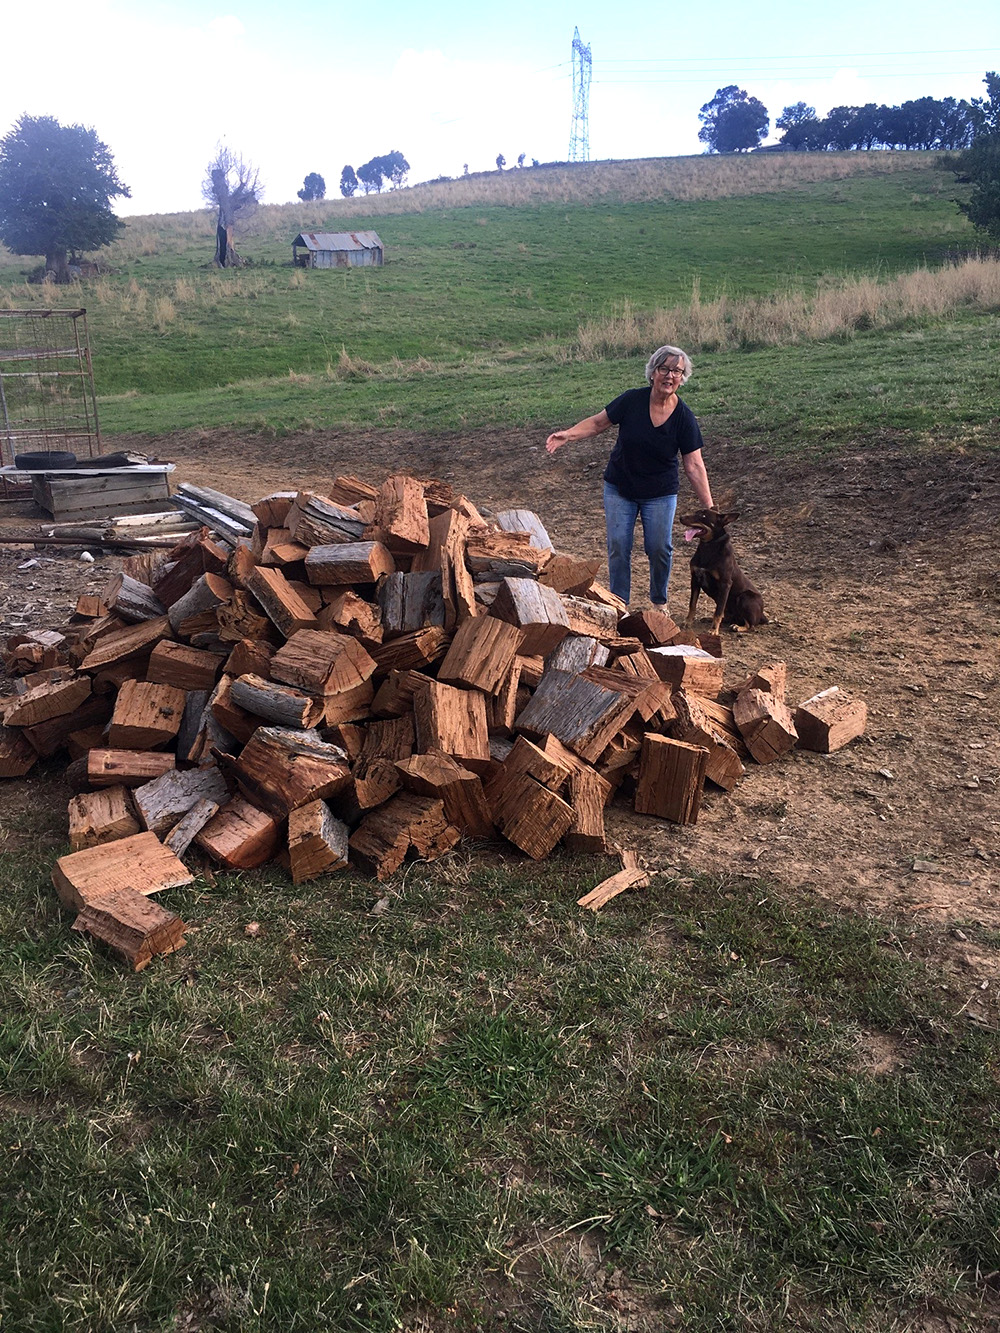 Anglicare provided firewood to this woman affected by bushfires in Batlow. © Anglicare/Debbi Fluke. Used with permission.